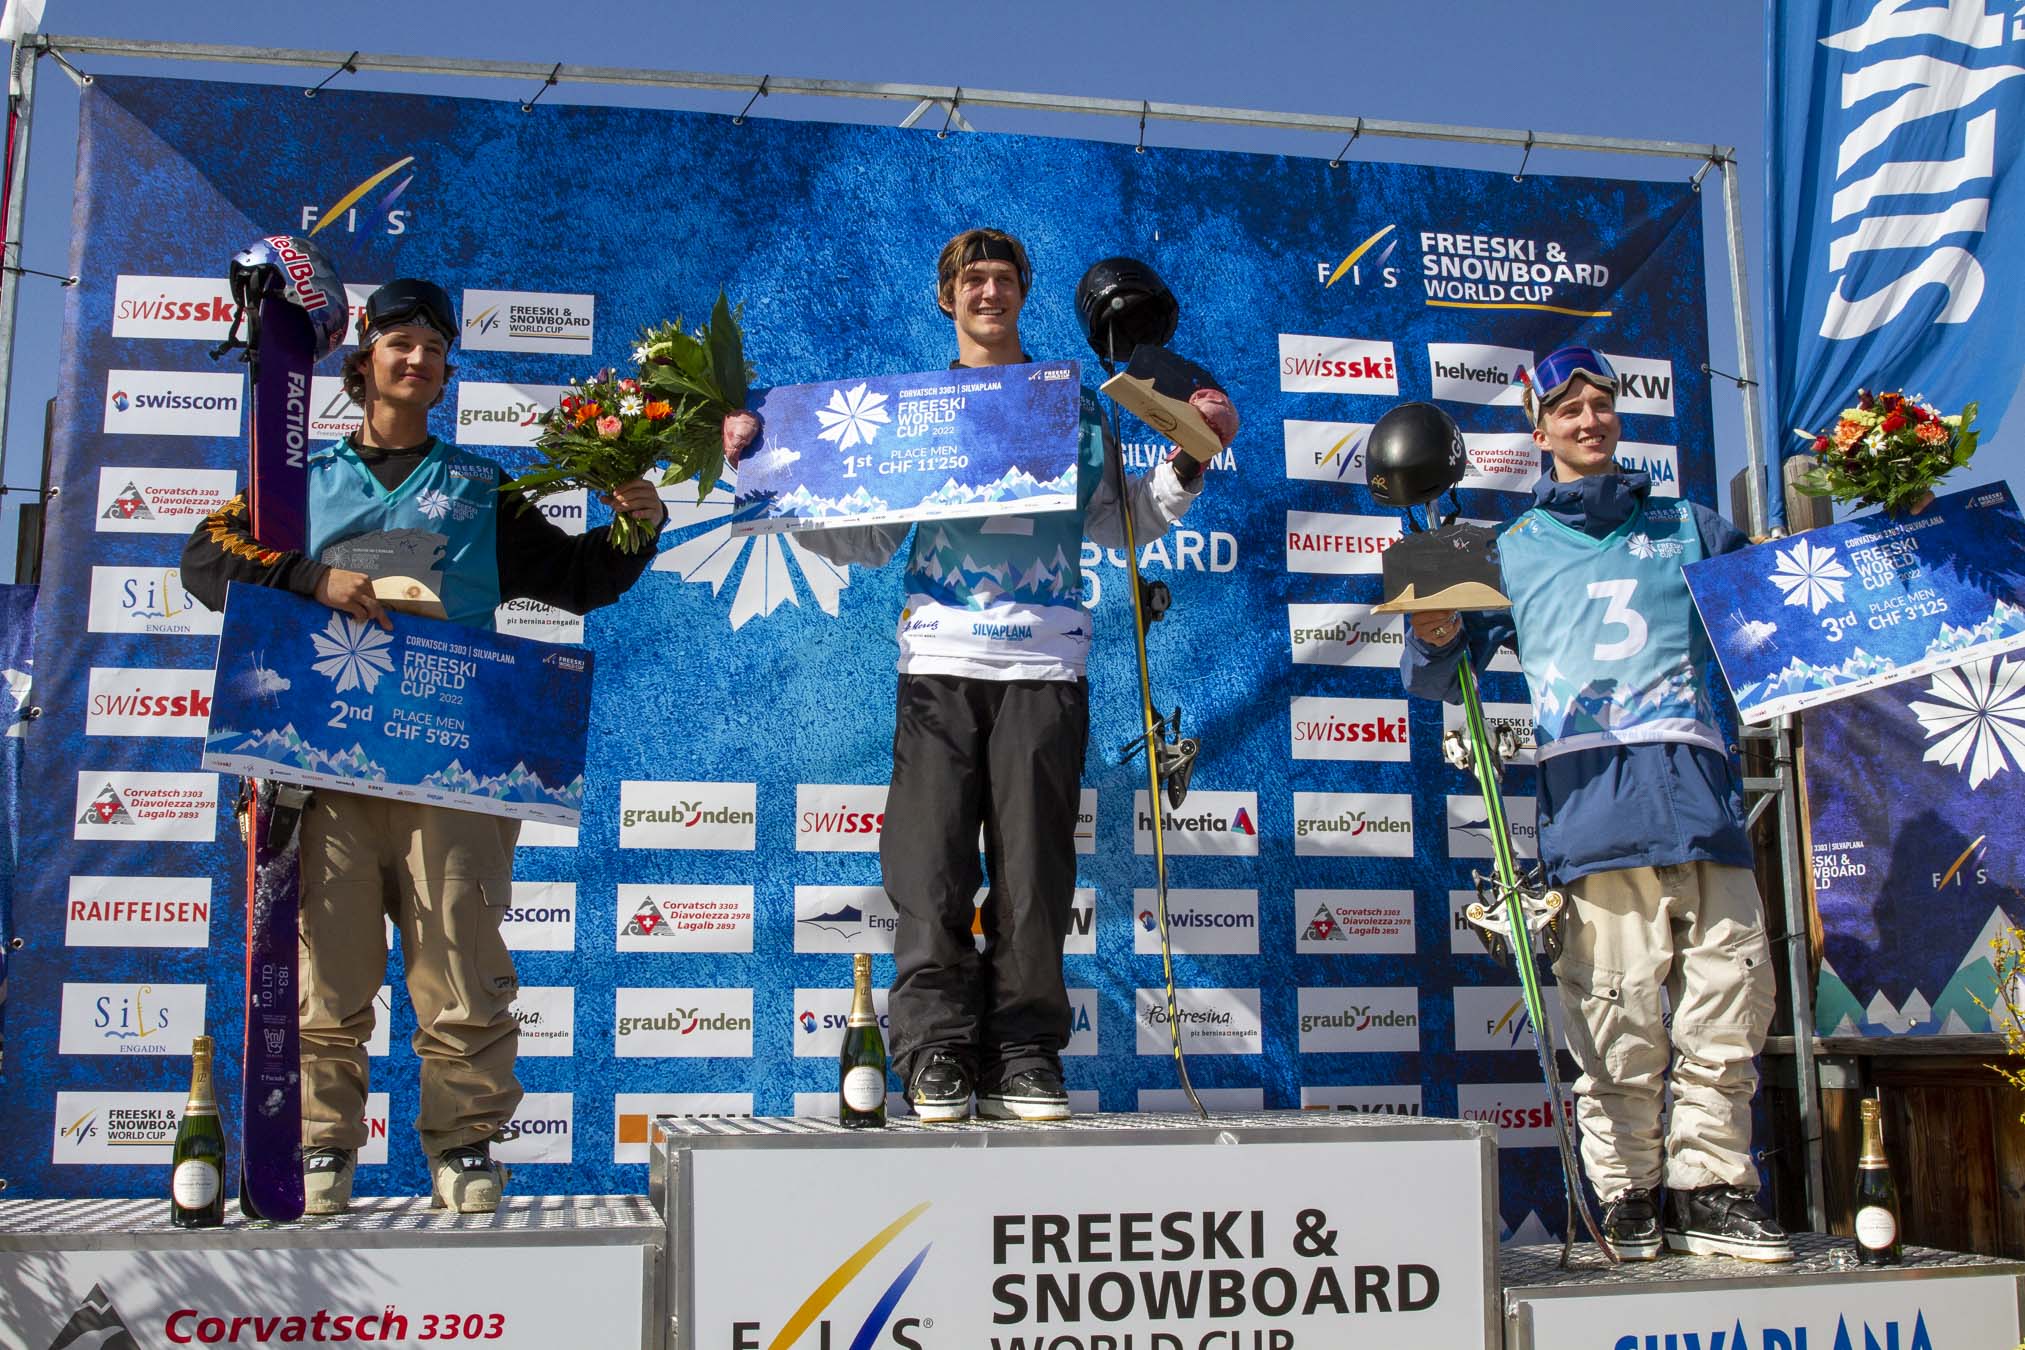 Mens podium at the 2022 Fis World Cup slopestyle in Corvatsch